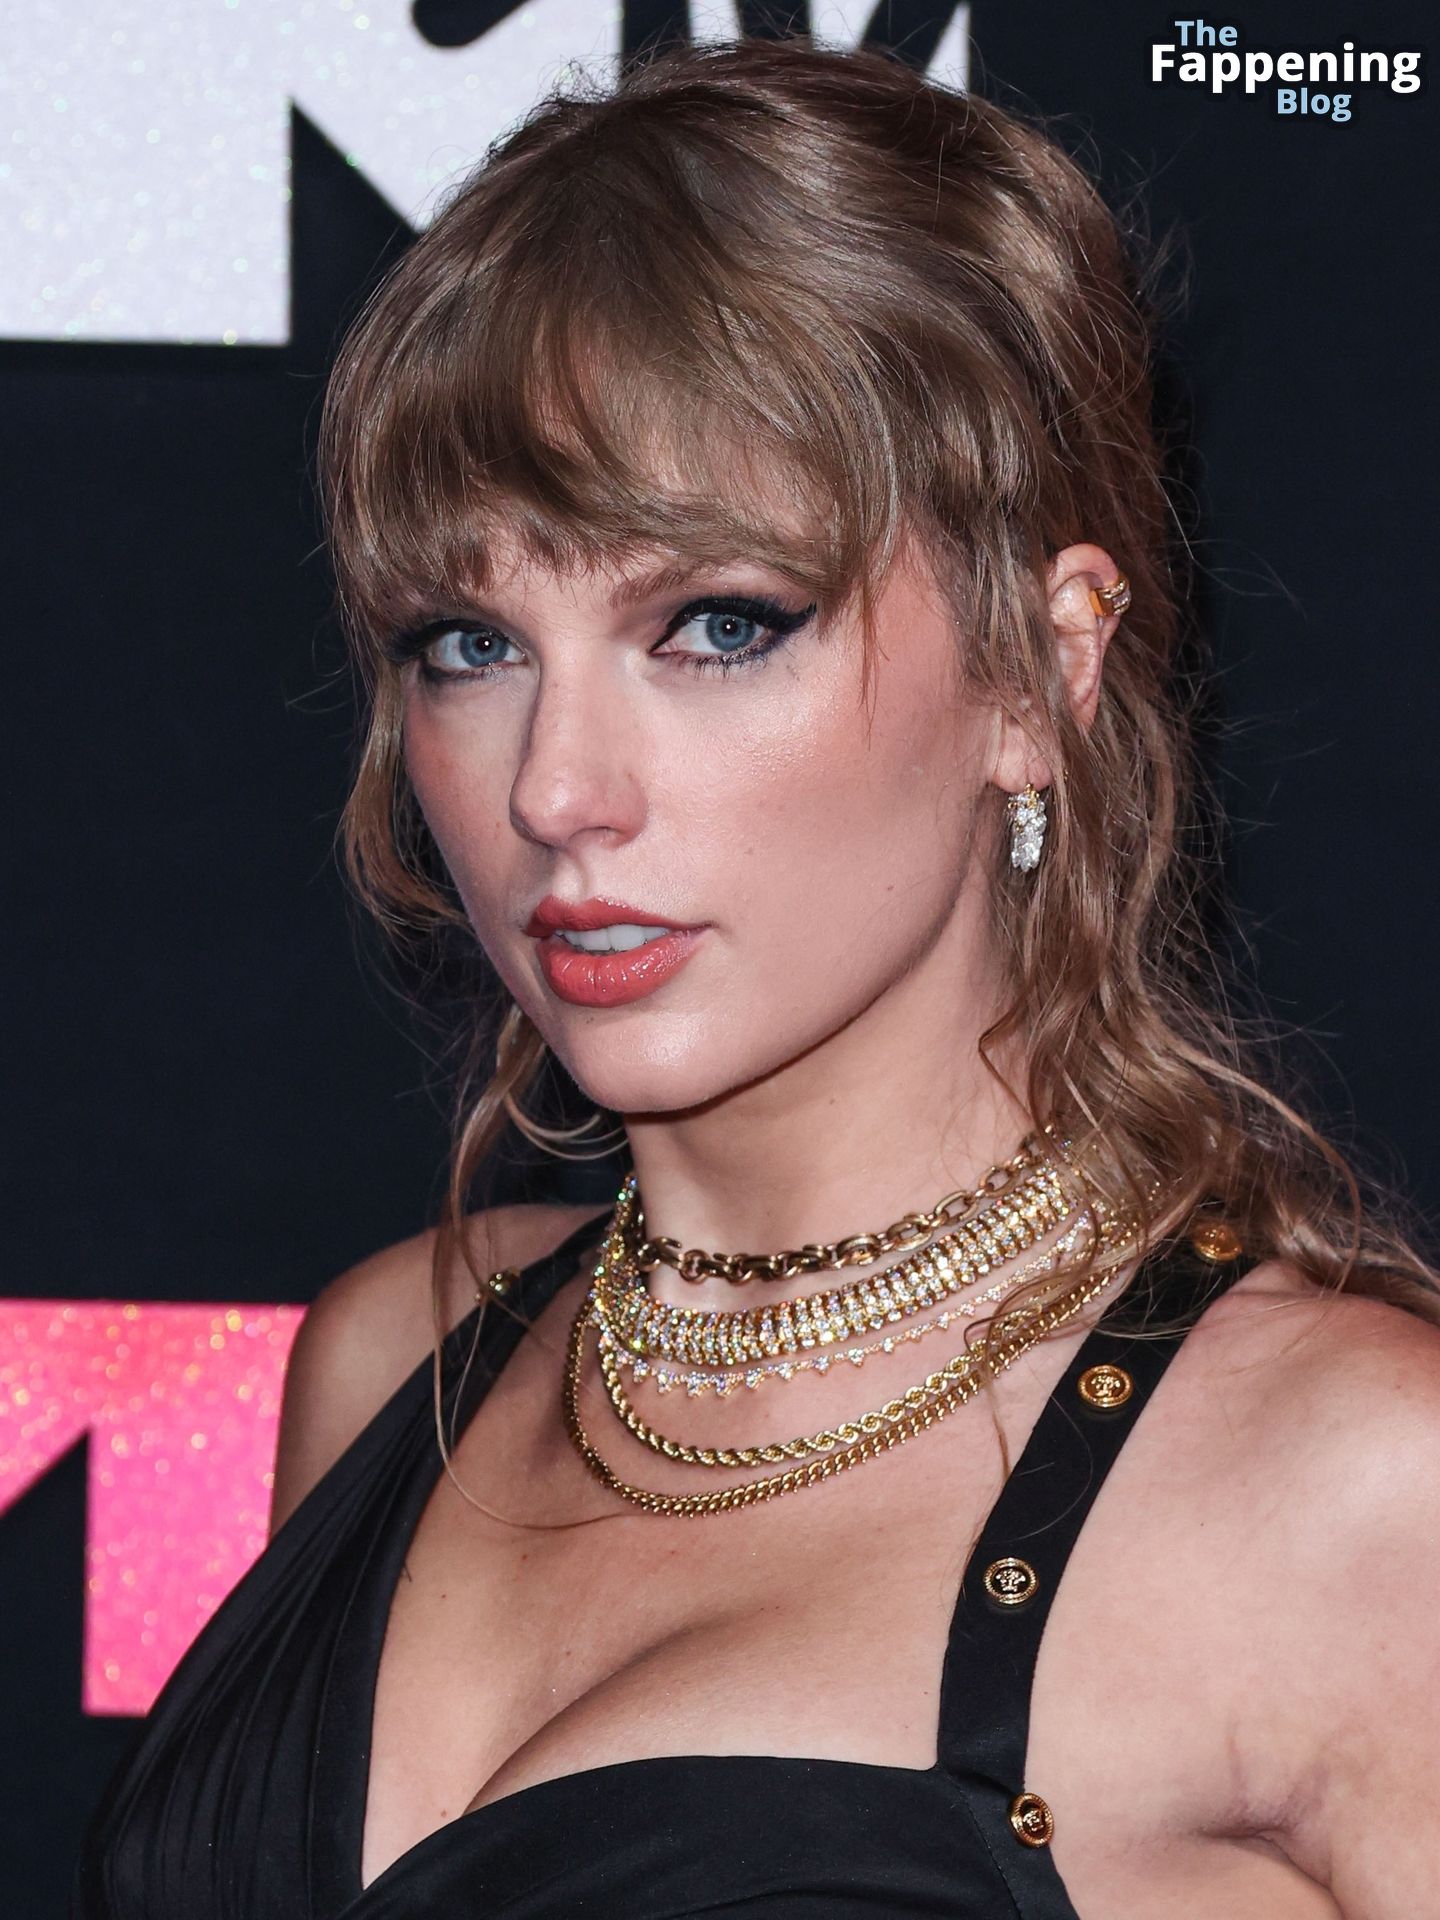 Taylor-Swift-Sexy-38-The-Fappening-Blog.jpg